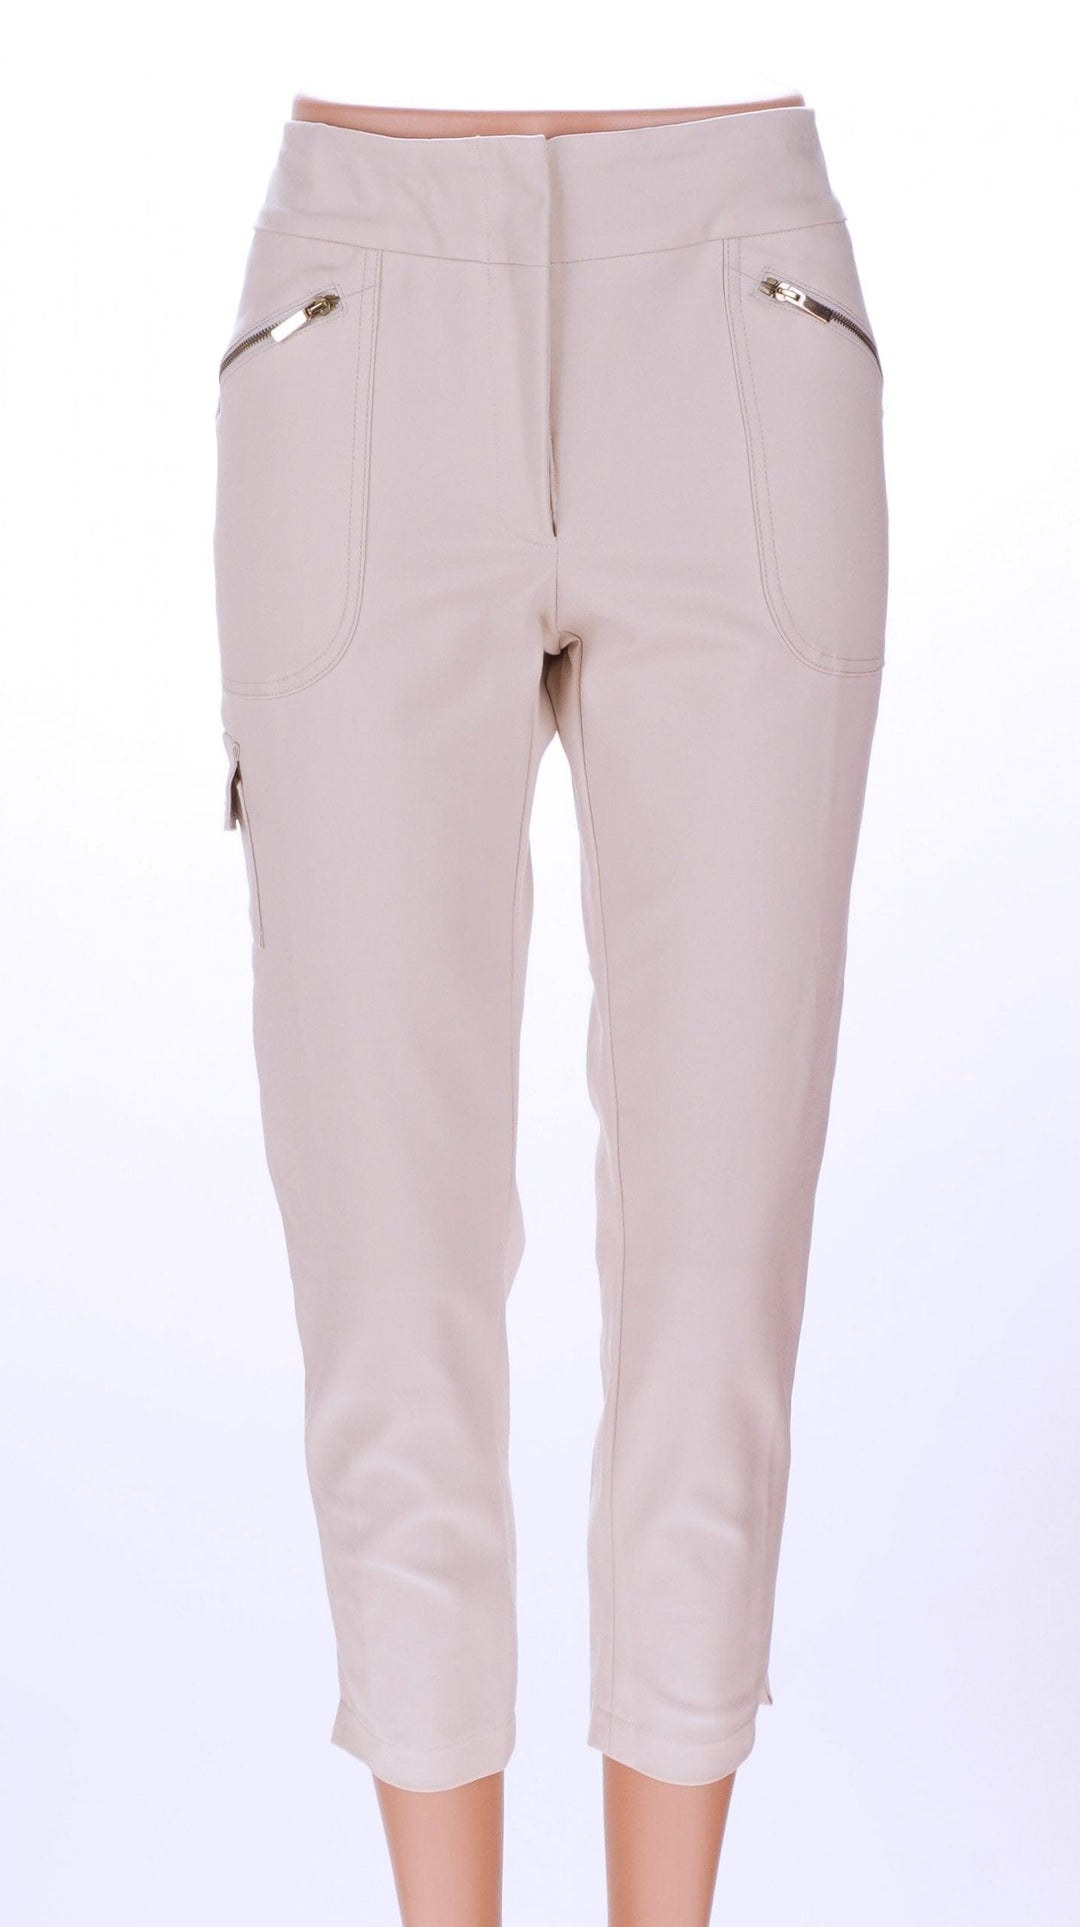 spitfire Large / Beige / Consigned-New With Tags Spitfire Monarch Beach Pant - Beige - Size Large (Petite)